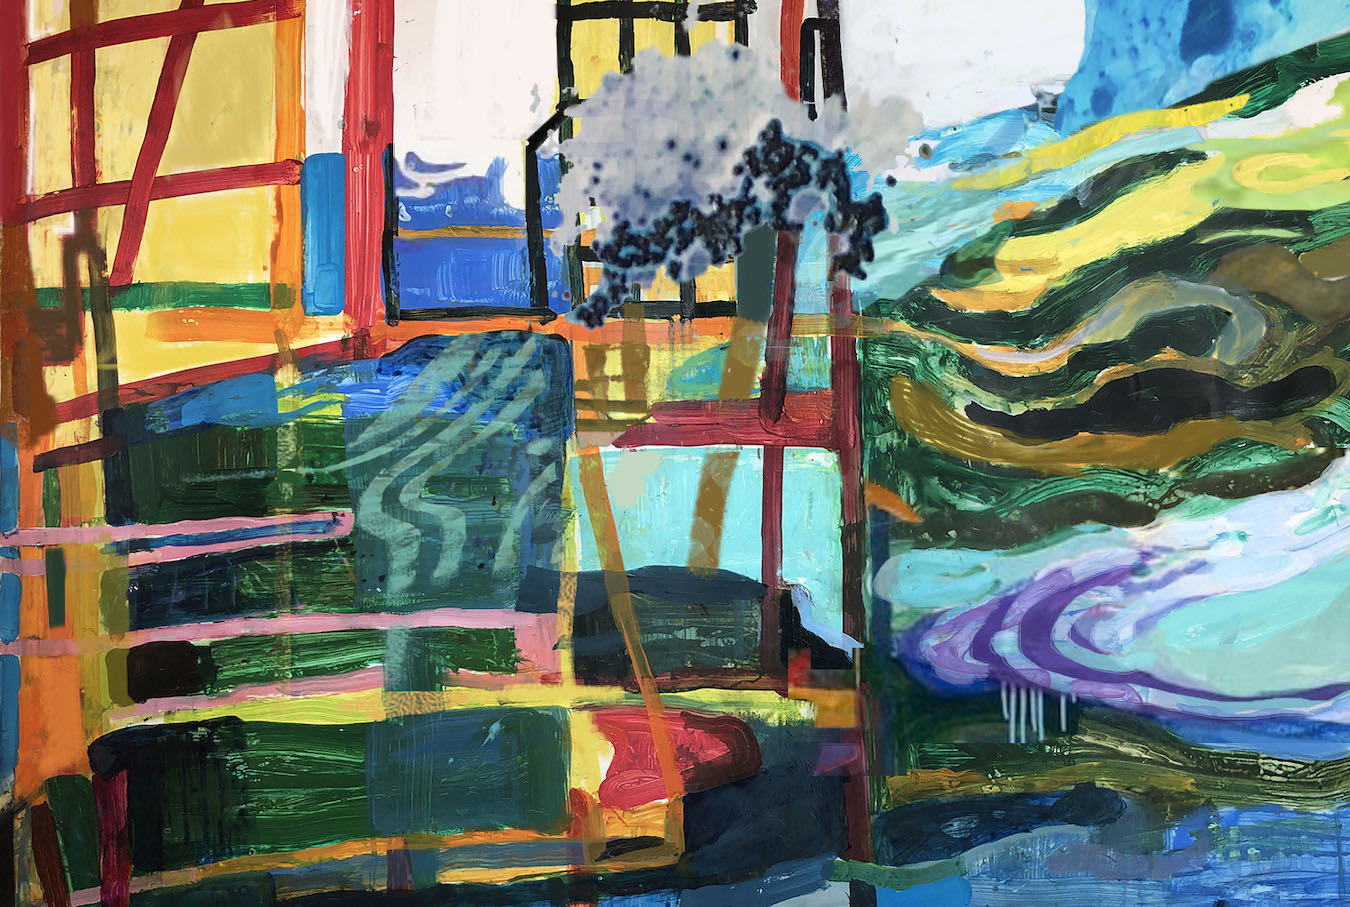 A painting of a chair and some trees